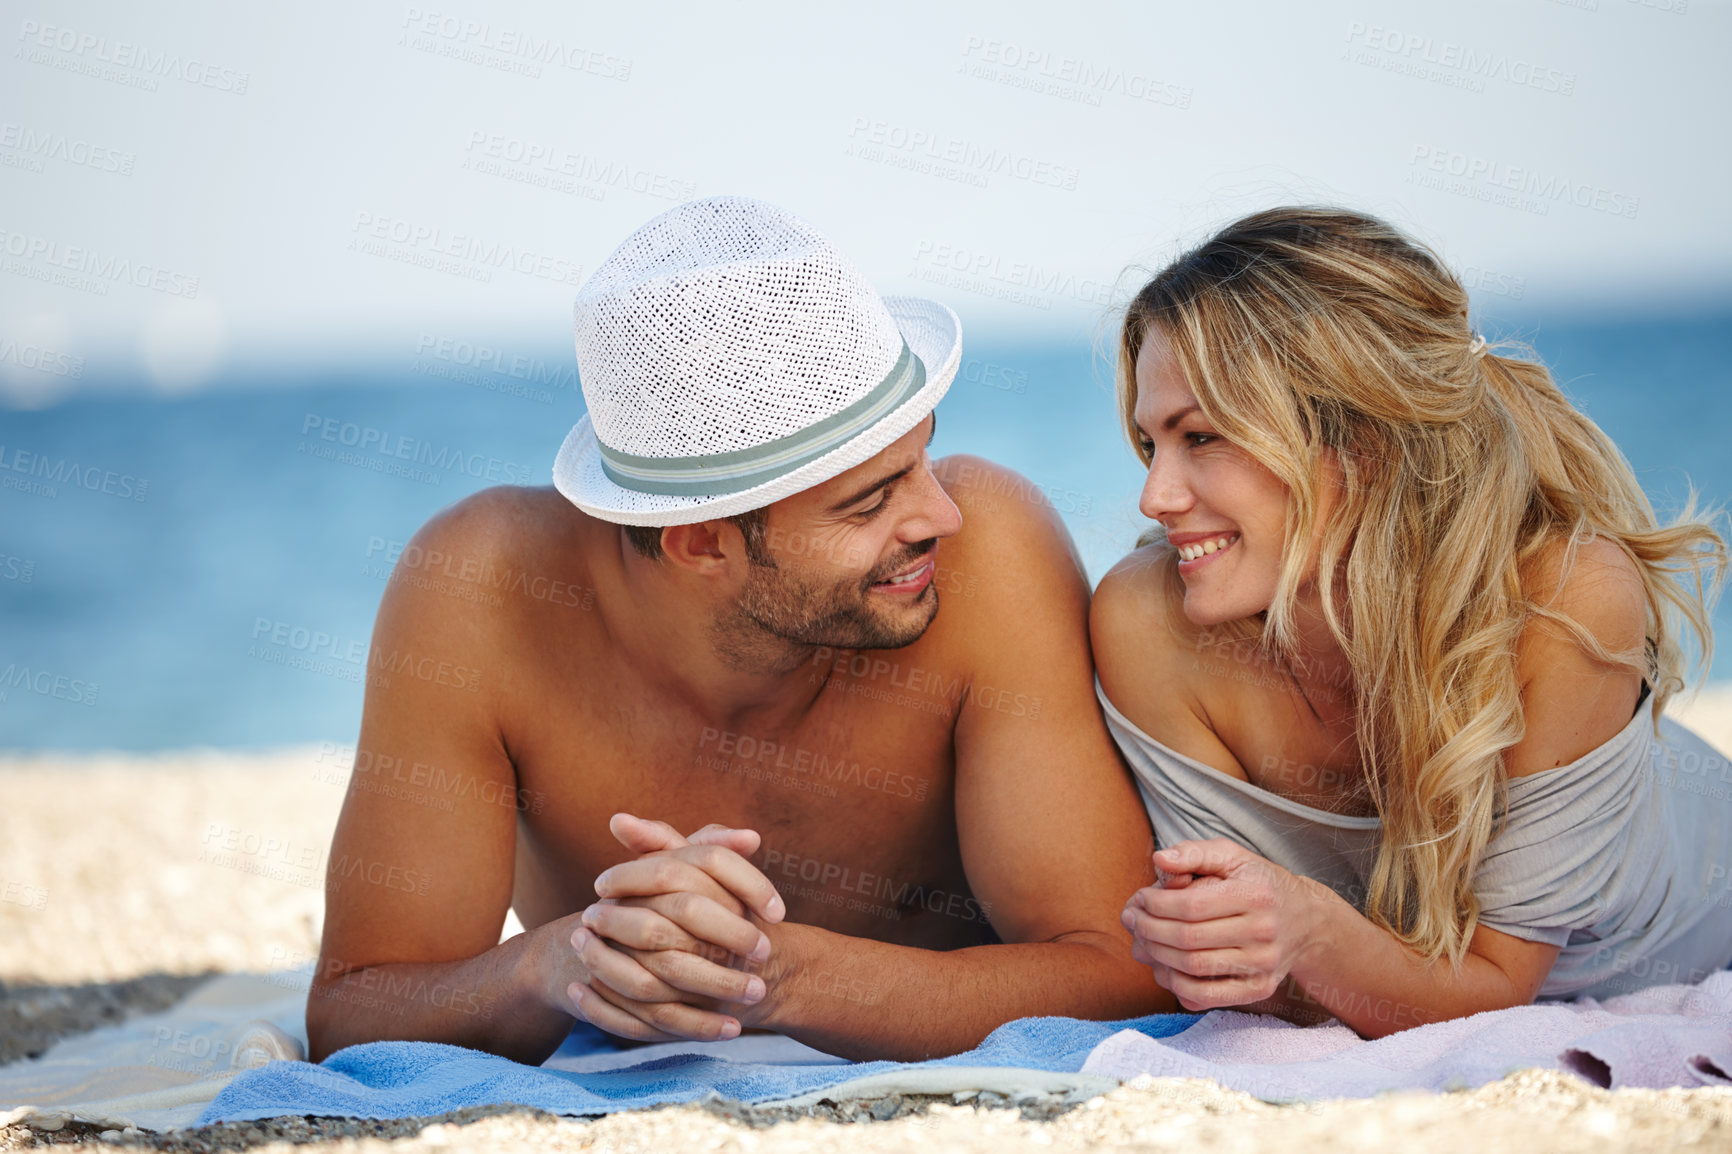 Buy stock photo Shot of a happy young couple lying on the beach